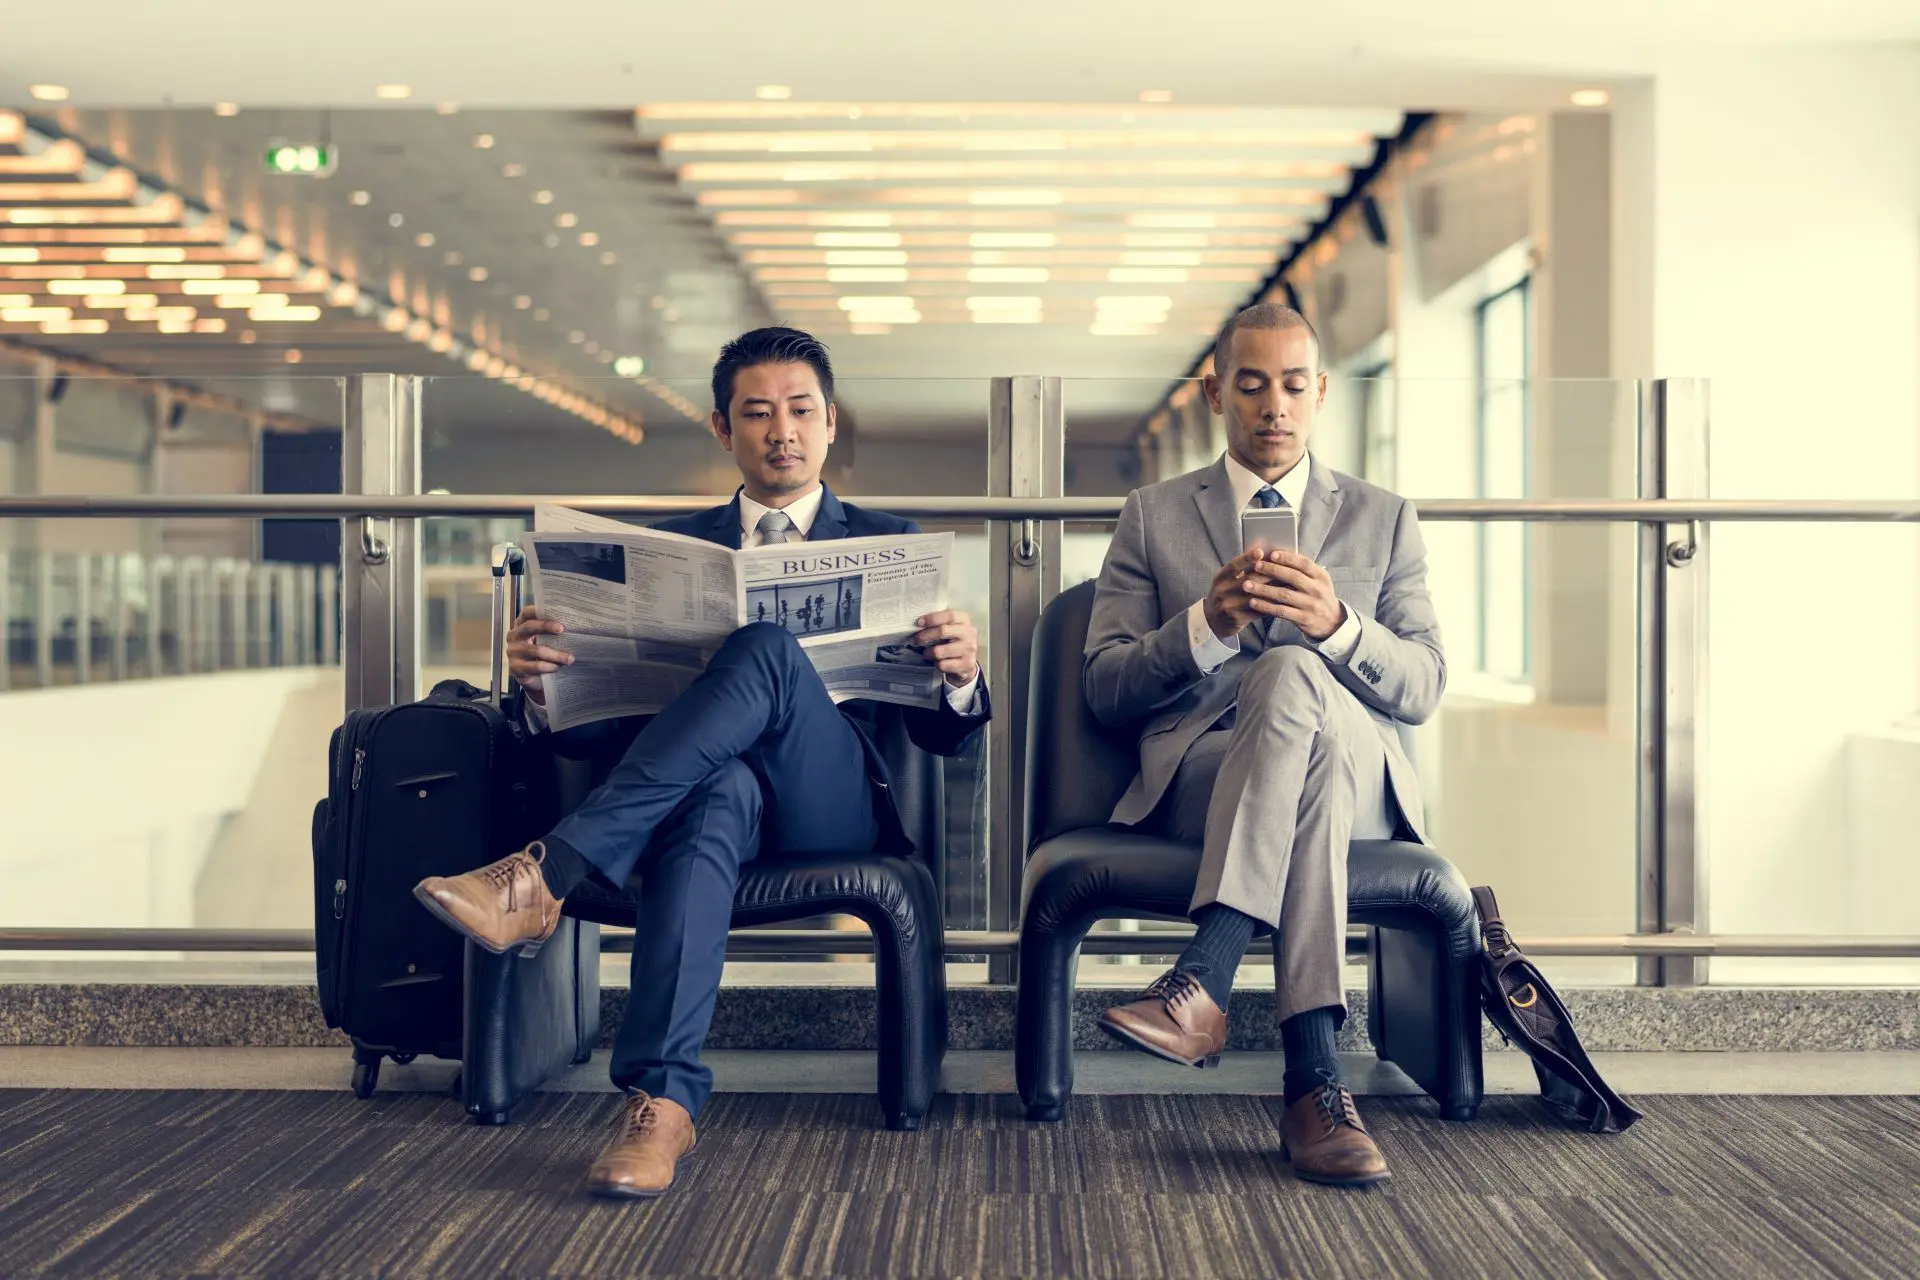 Two men who have crossed their legs reading the newspaper and checking their mobile phone